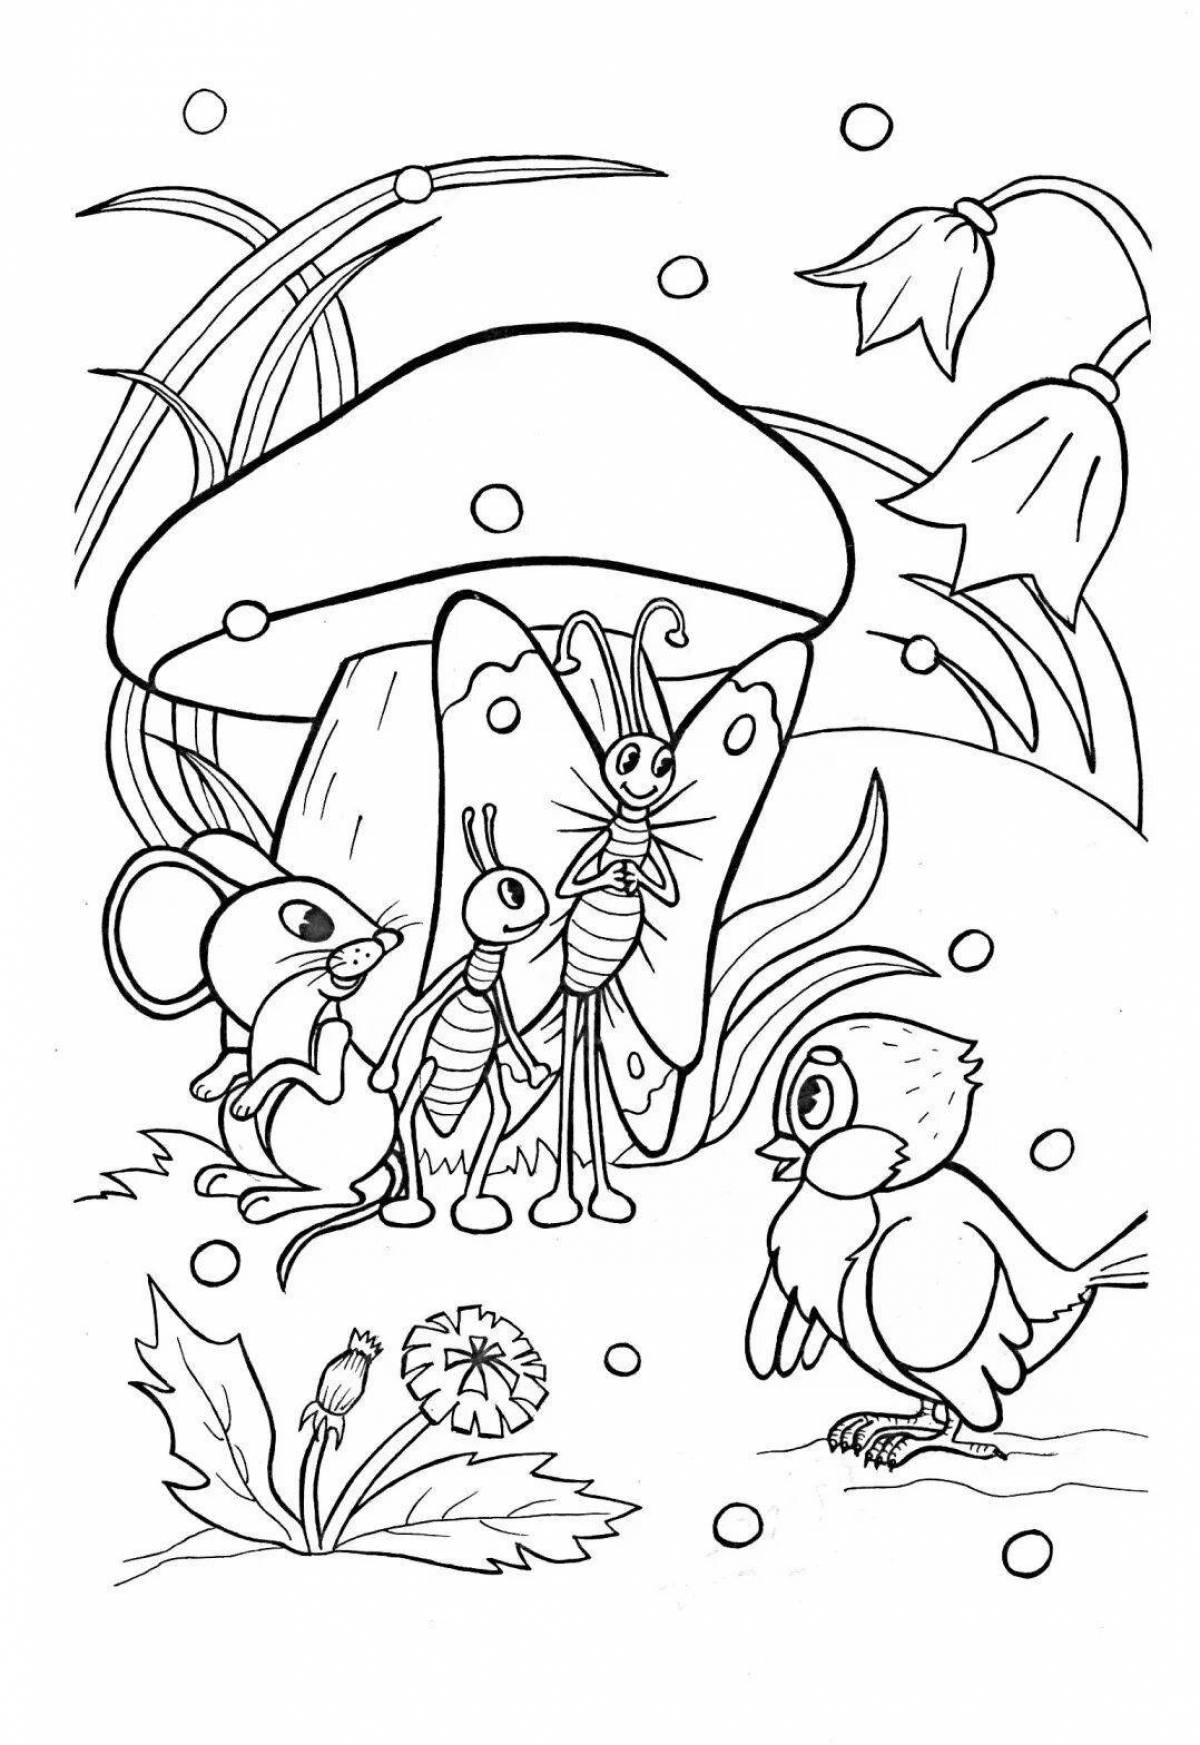 Fun coloring story for kids